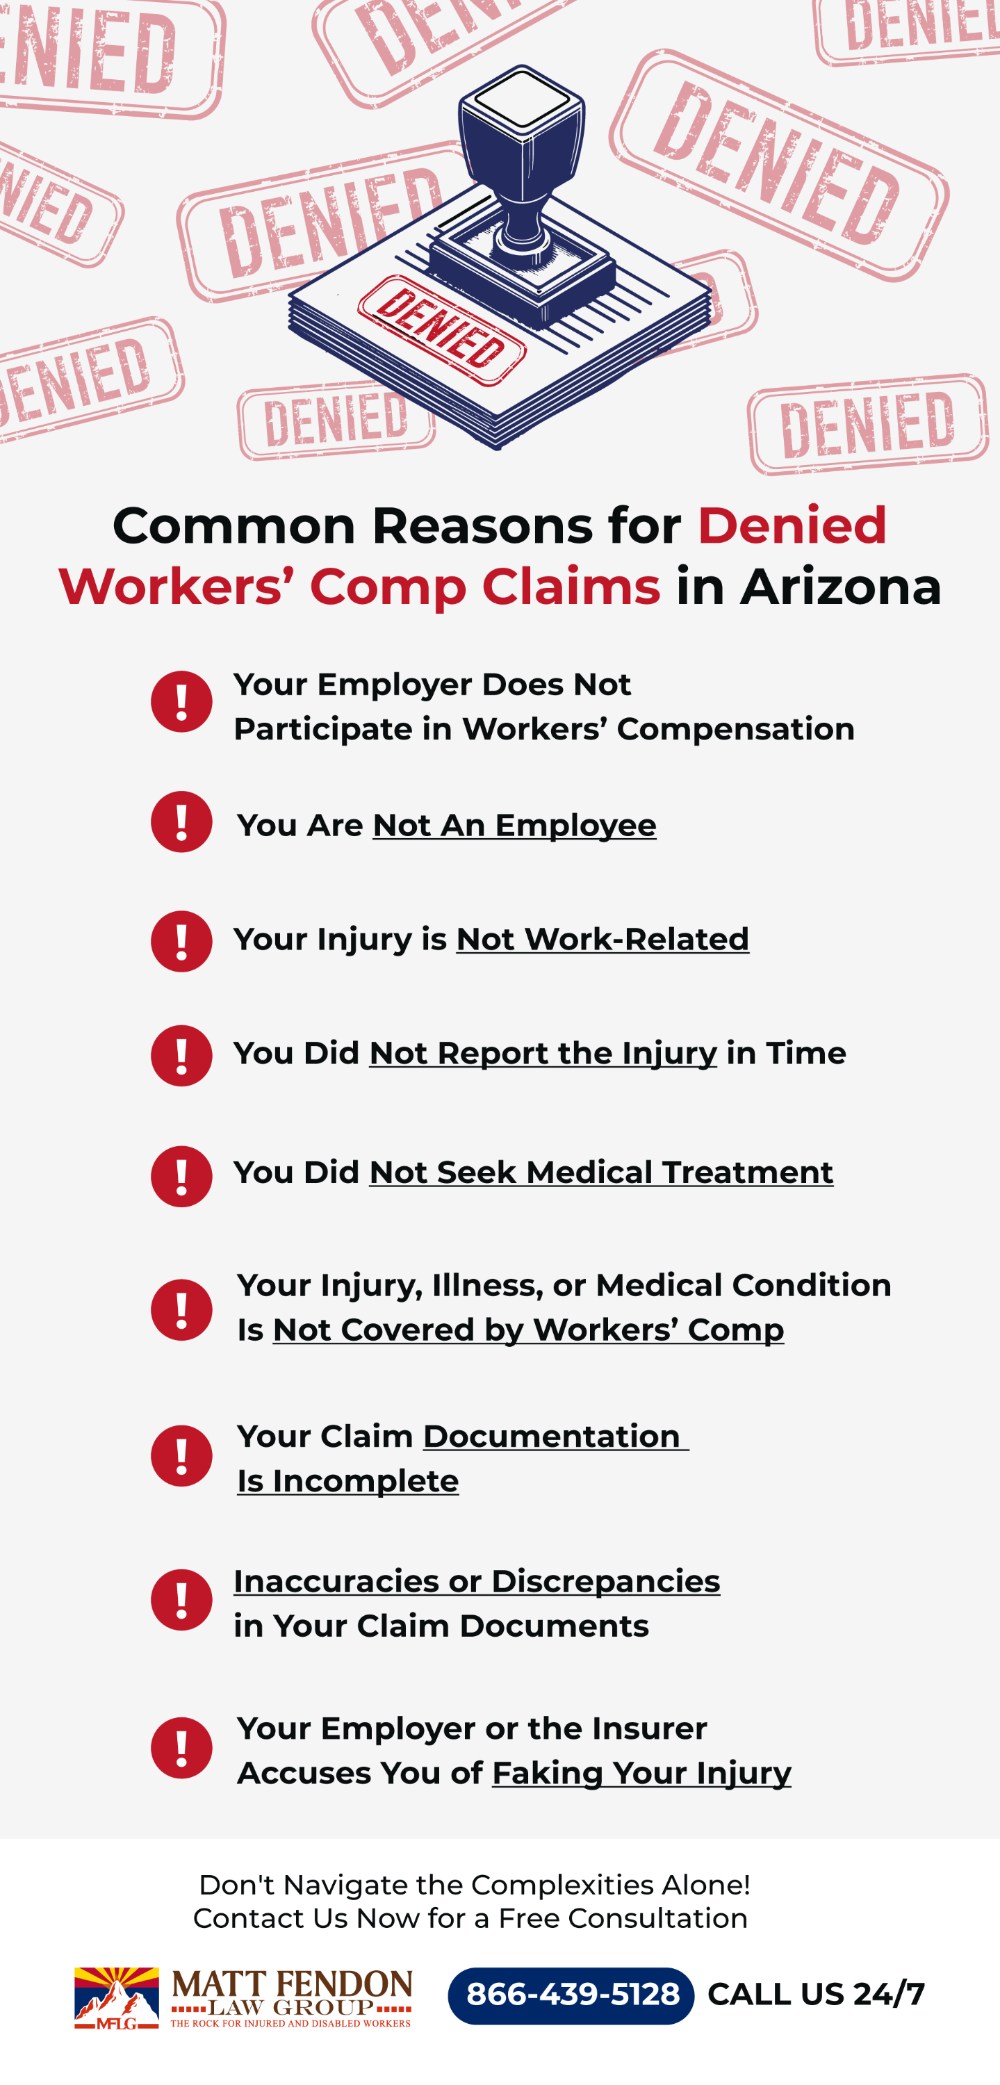 Common reasons for denied workers' comp claims in Arizona